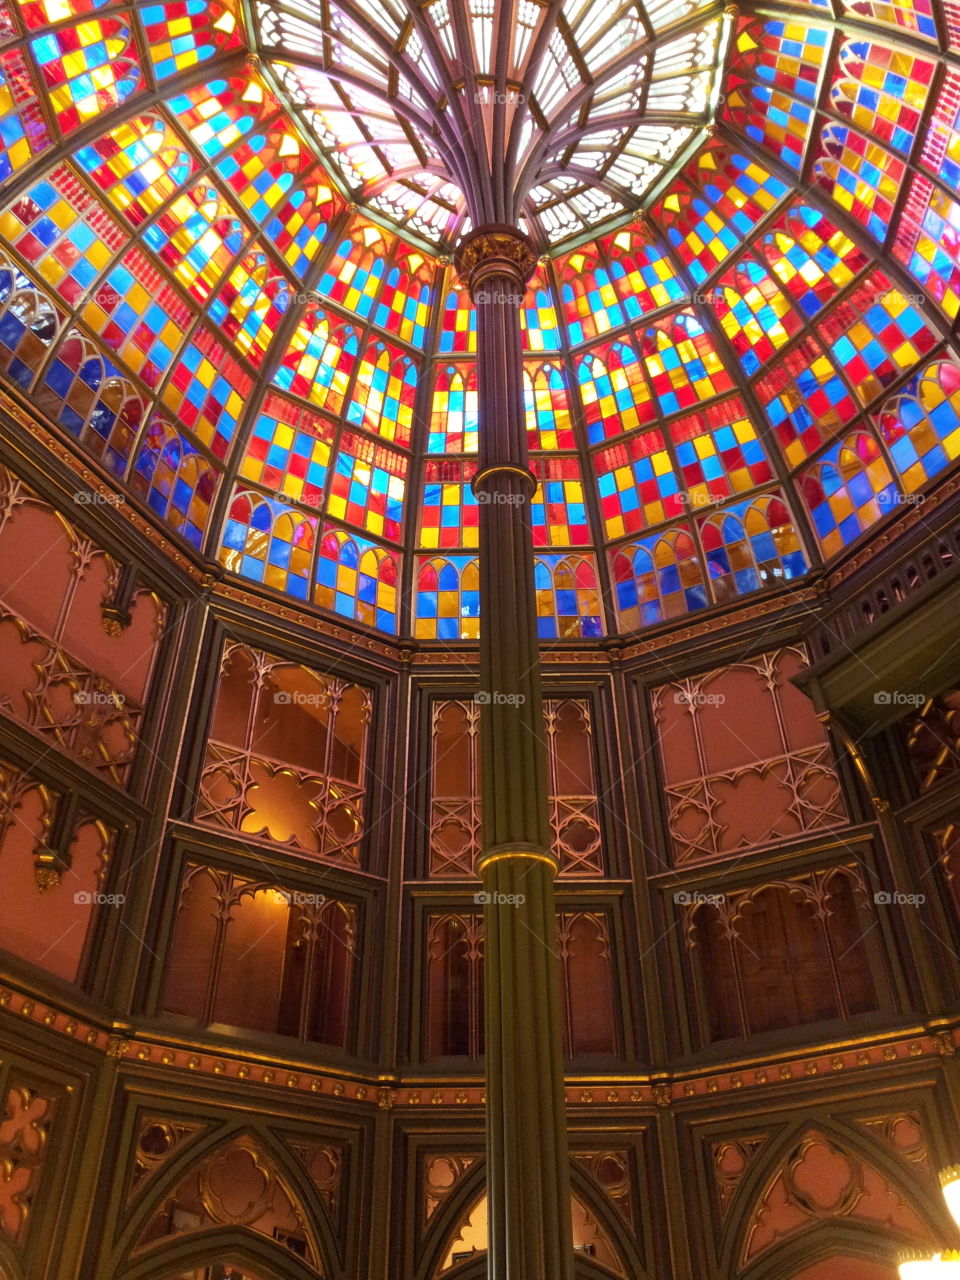 Stained glass dome ceiling